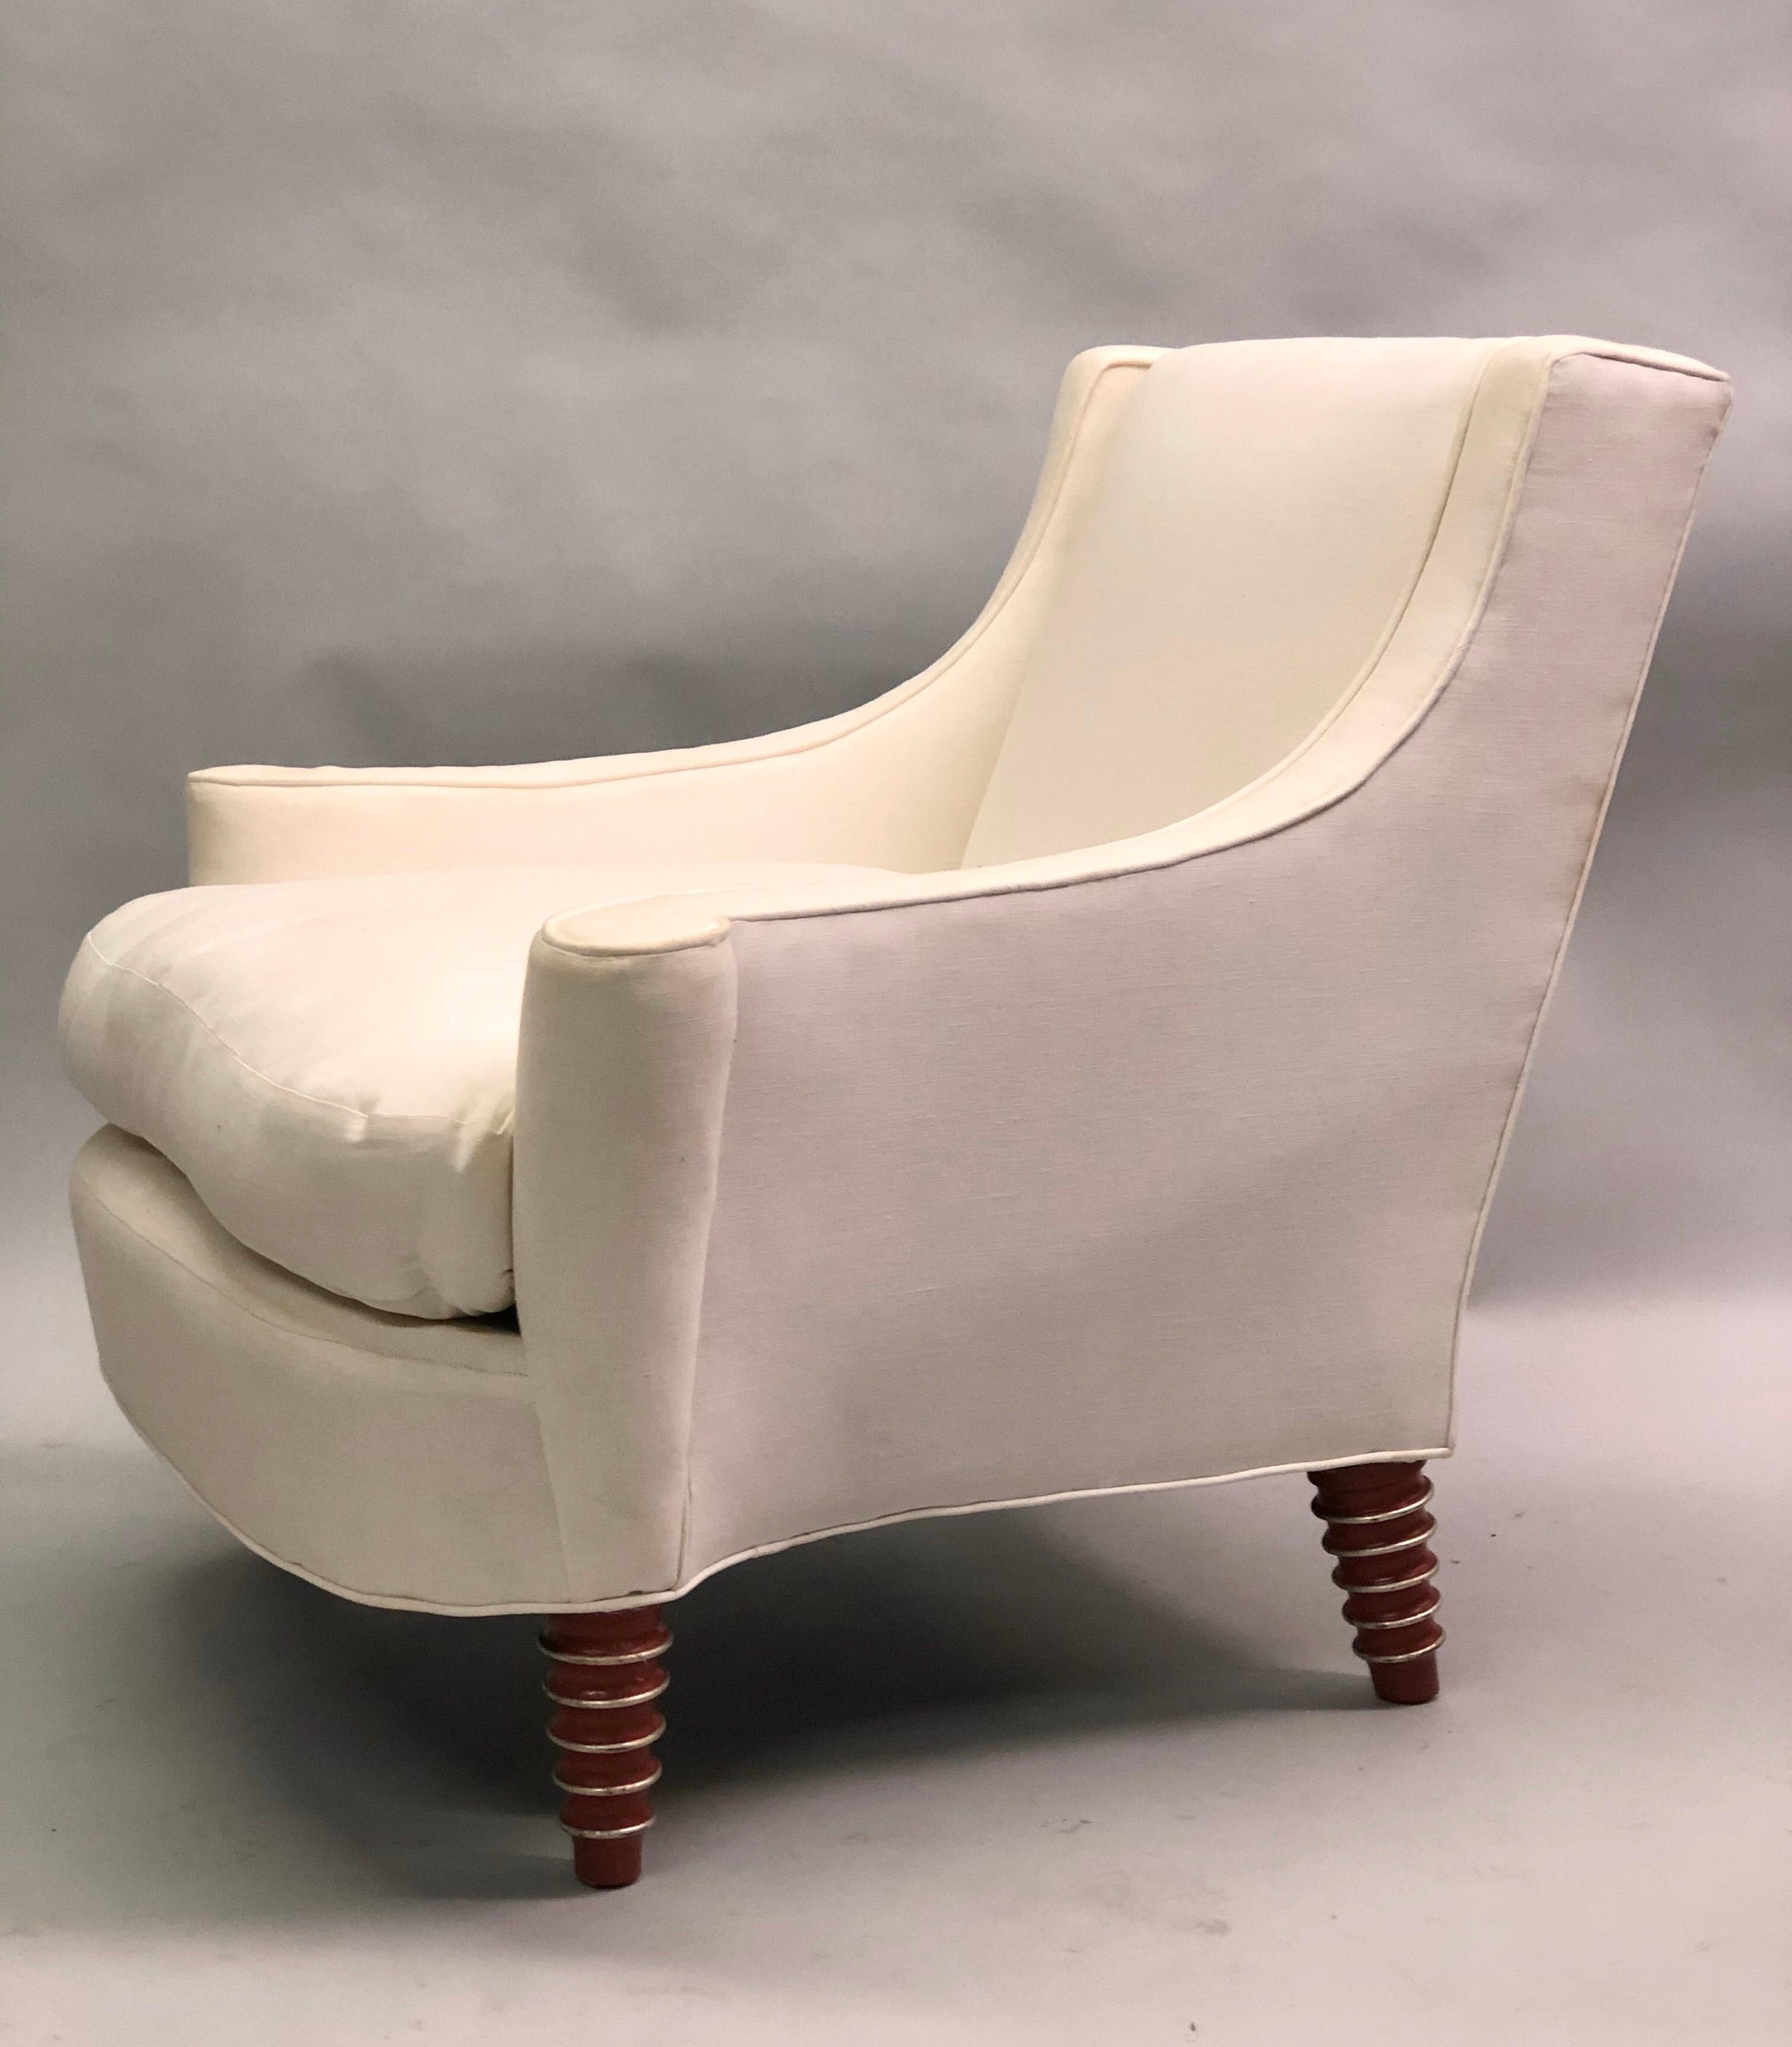 Hand-Carved Custom Pair of French Modern Neoclassical Lounge Chairs by Maison Jansen